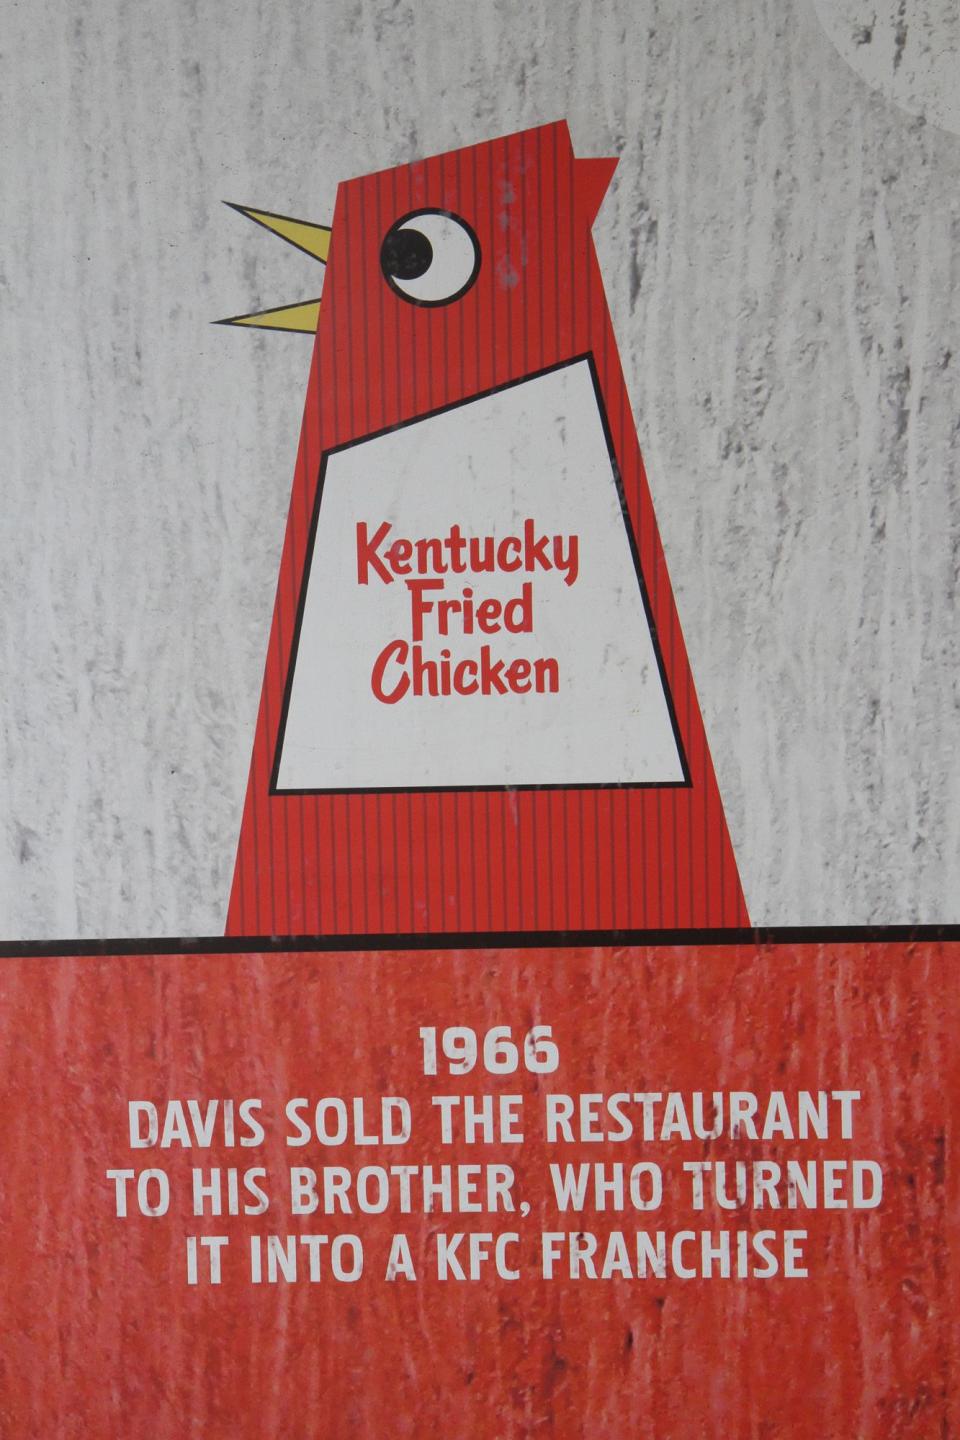 In 1966, Davis sold the restaurant to his brother, who turned it into a KFC franchise.